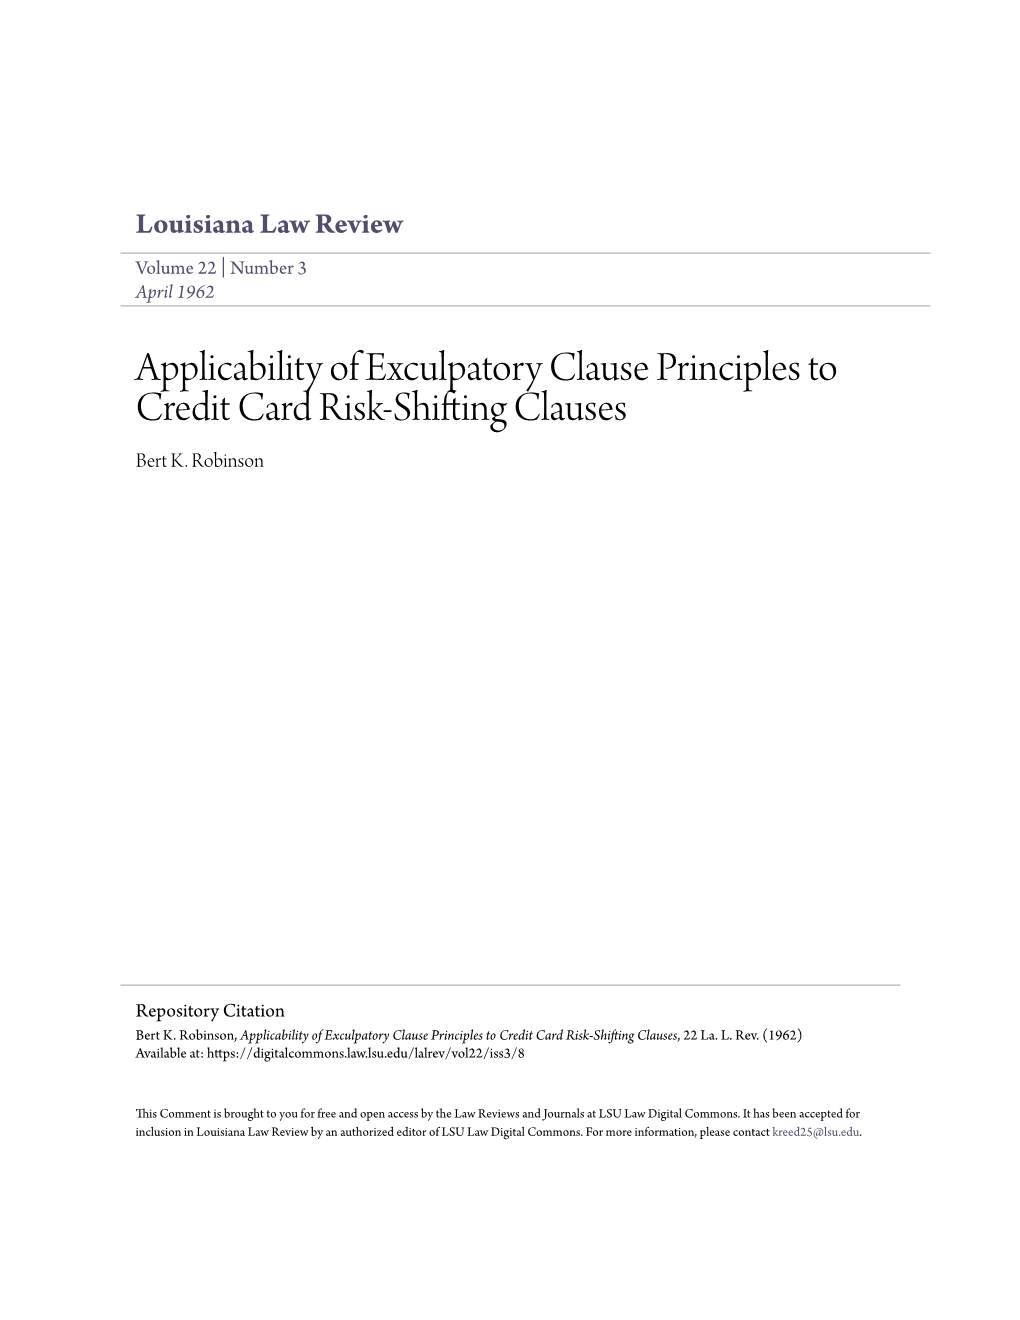 Applicability of Exculpatory Clause Principles to Credit Card Risk-Shifting Clauses Bert K